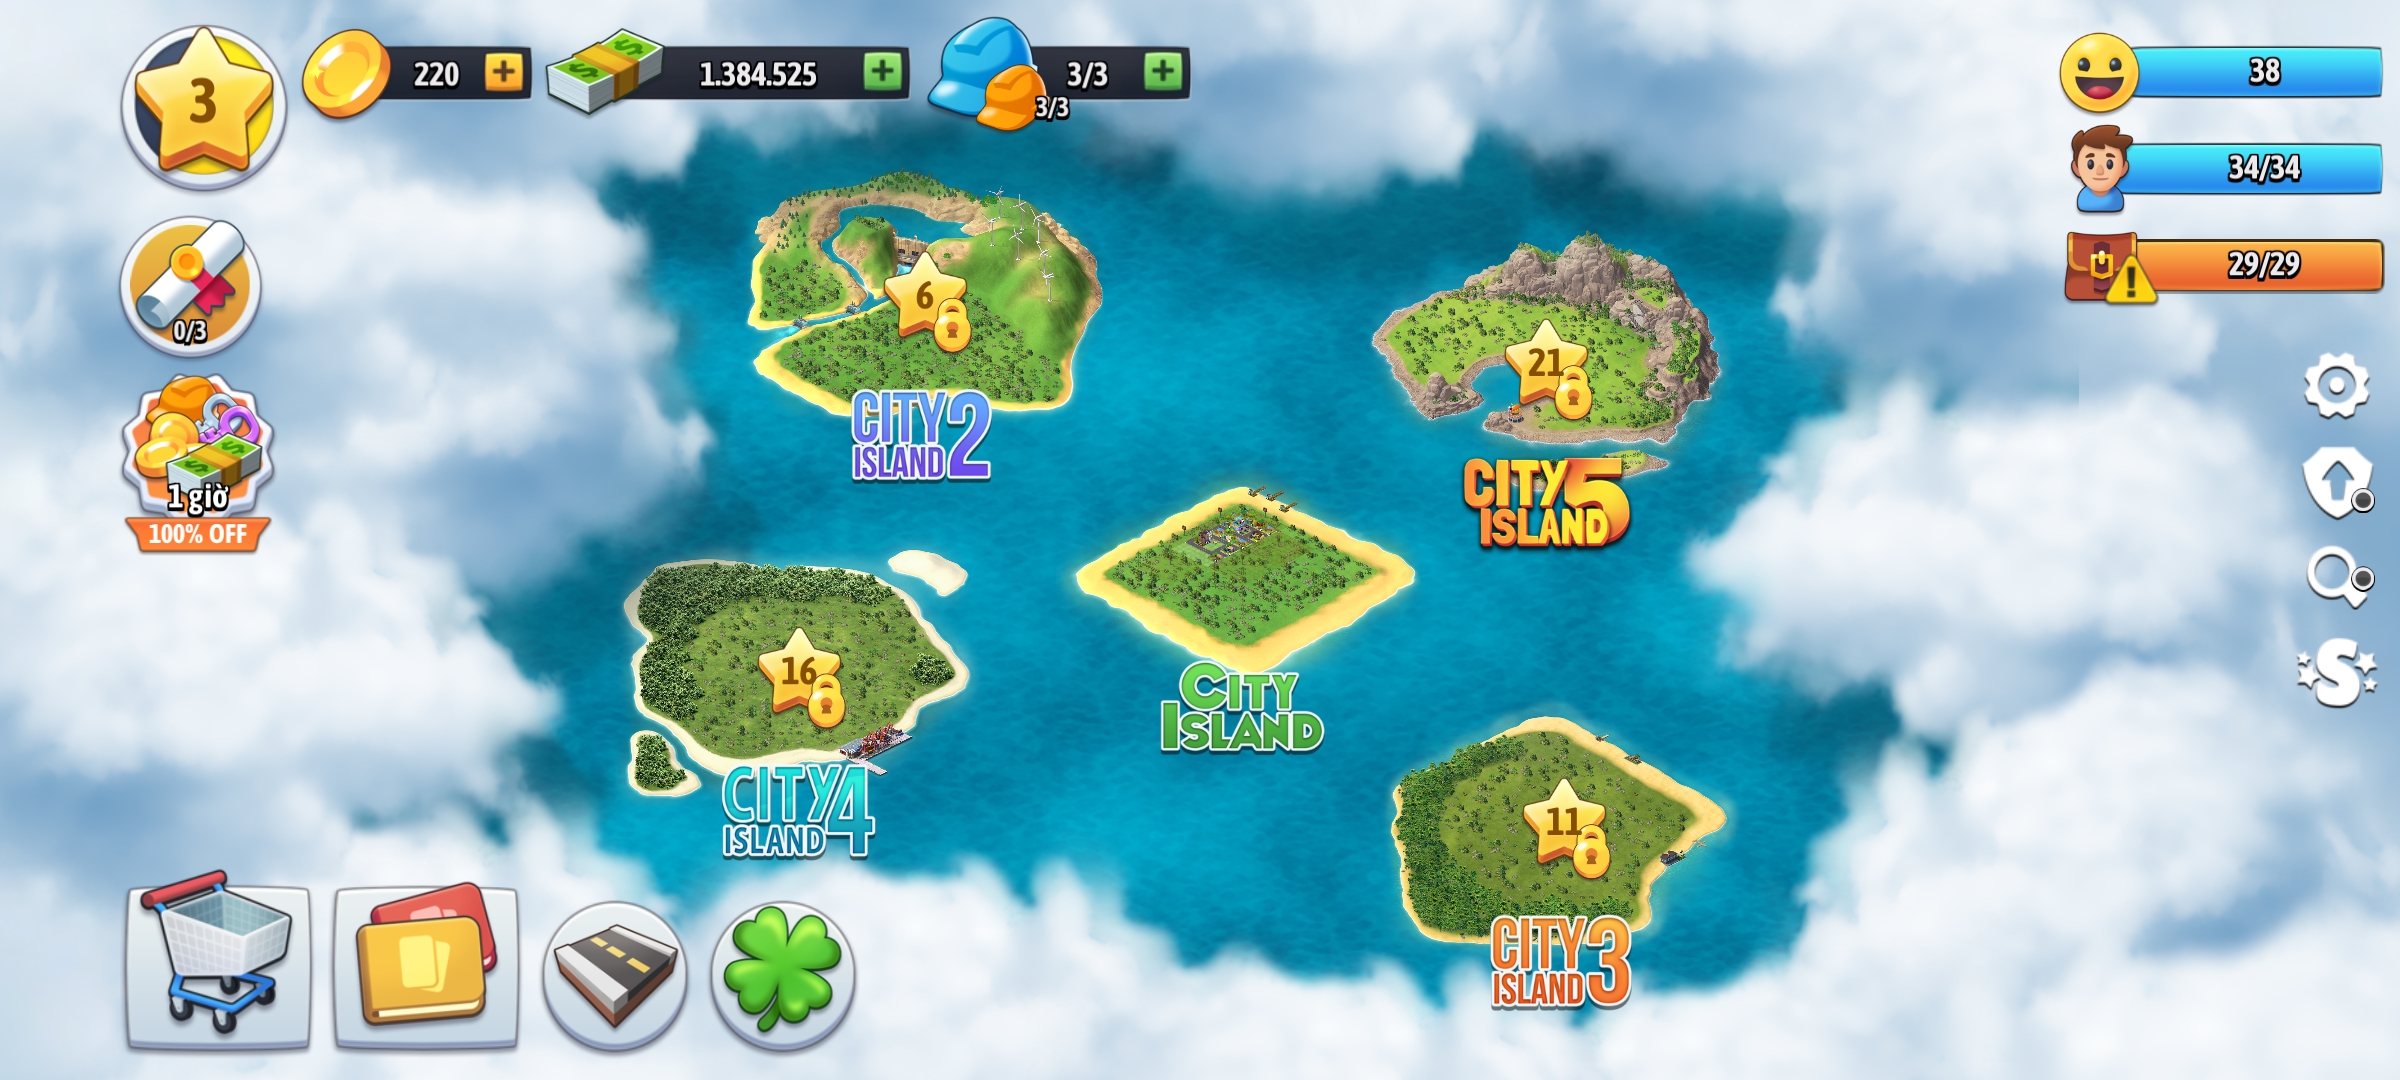 [Game Android] City Island: Collections Game Tiếng Việt